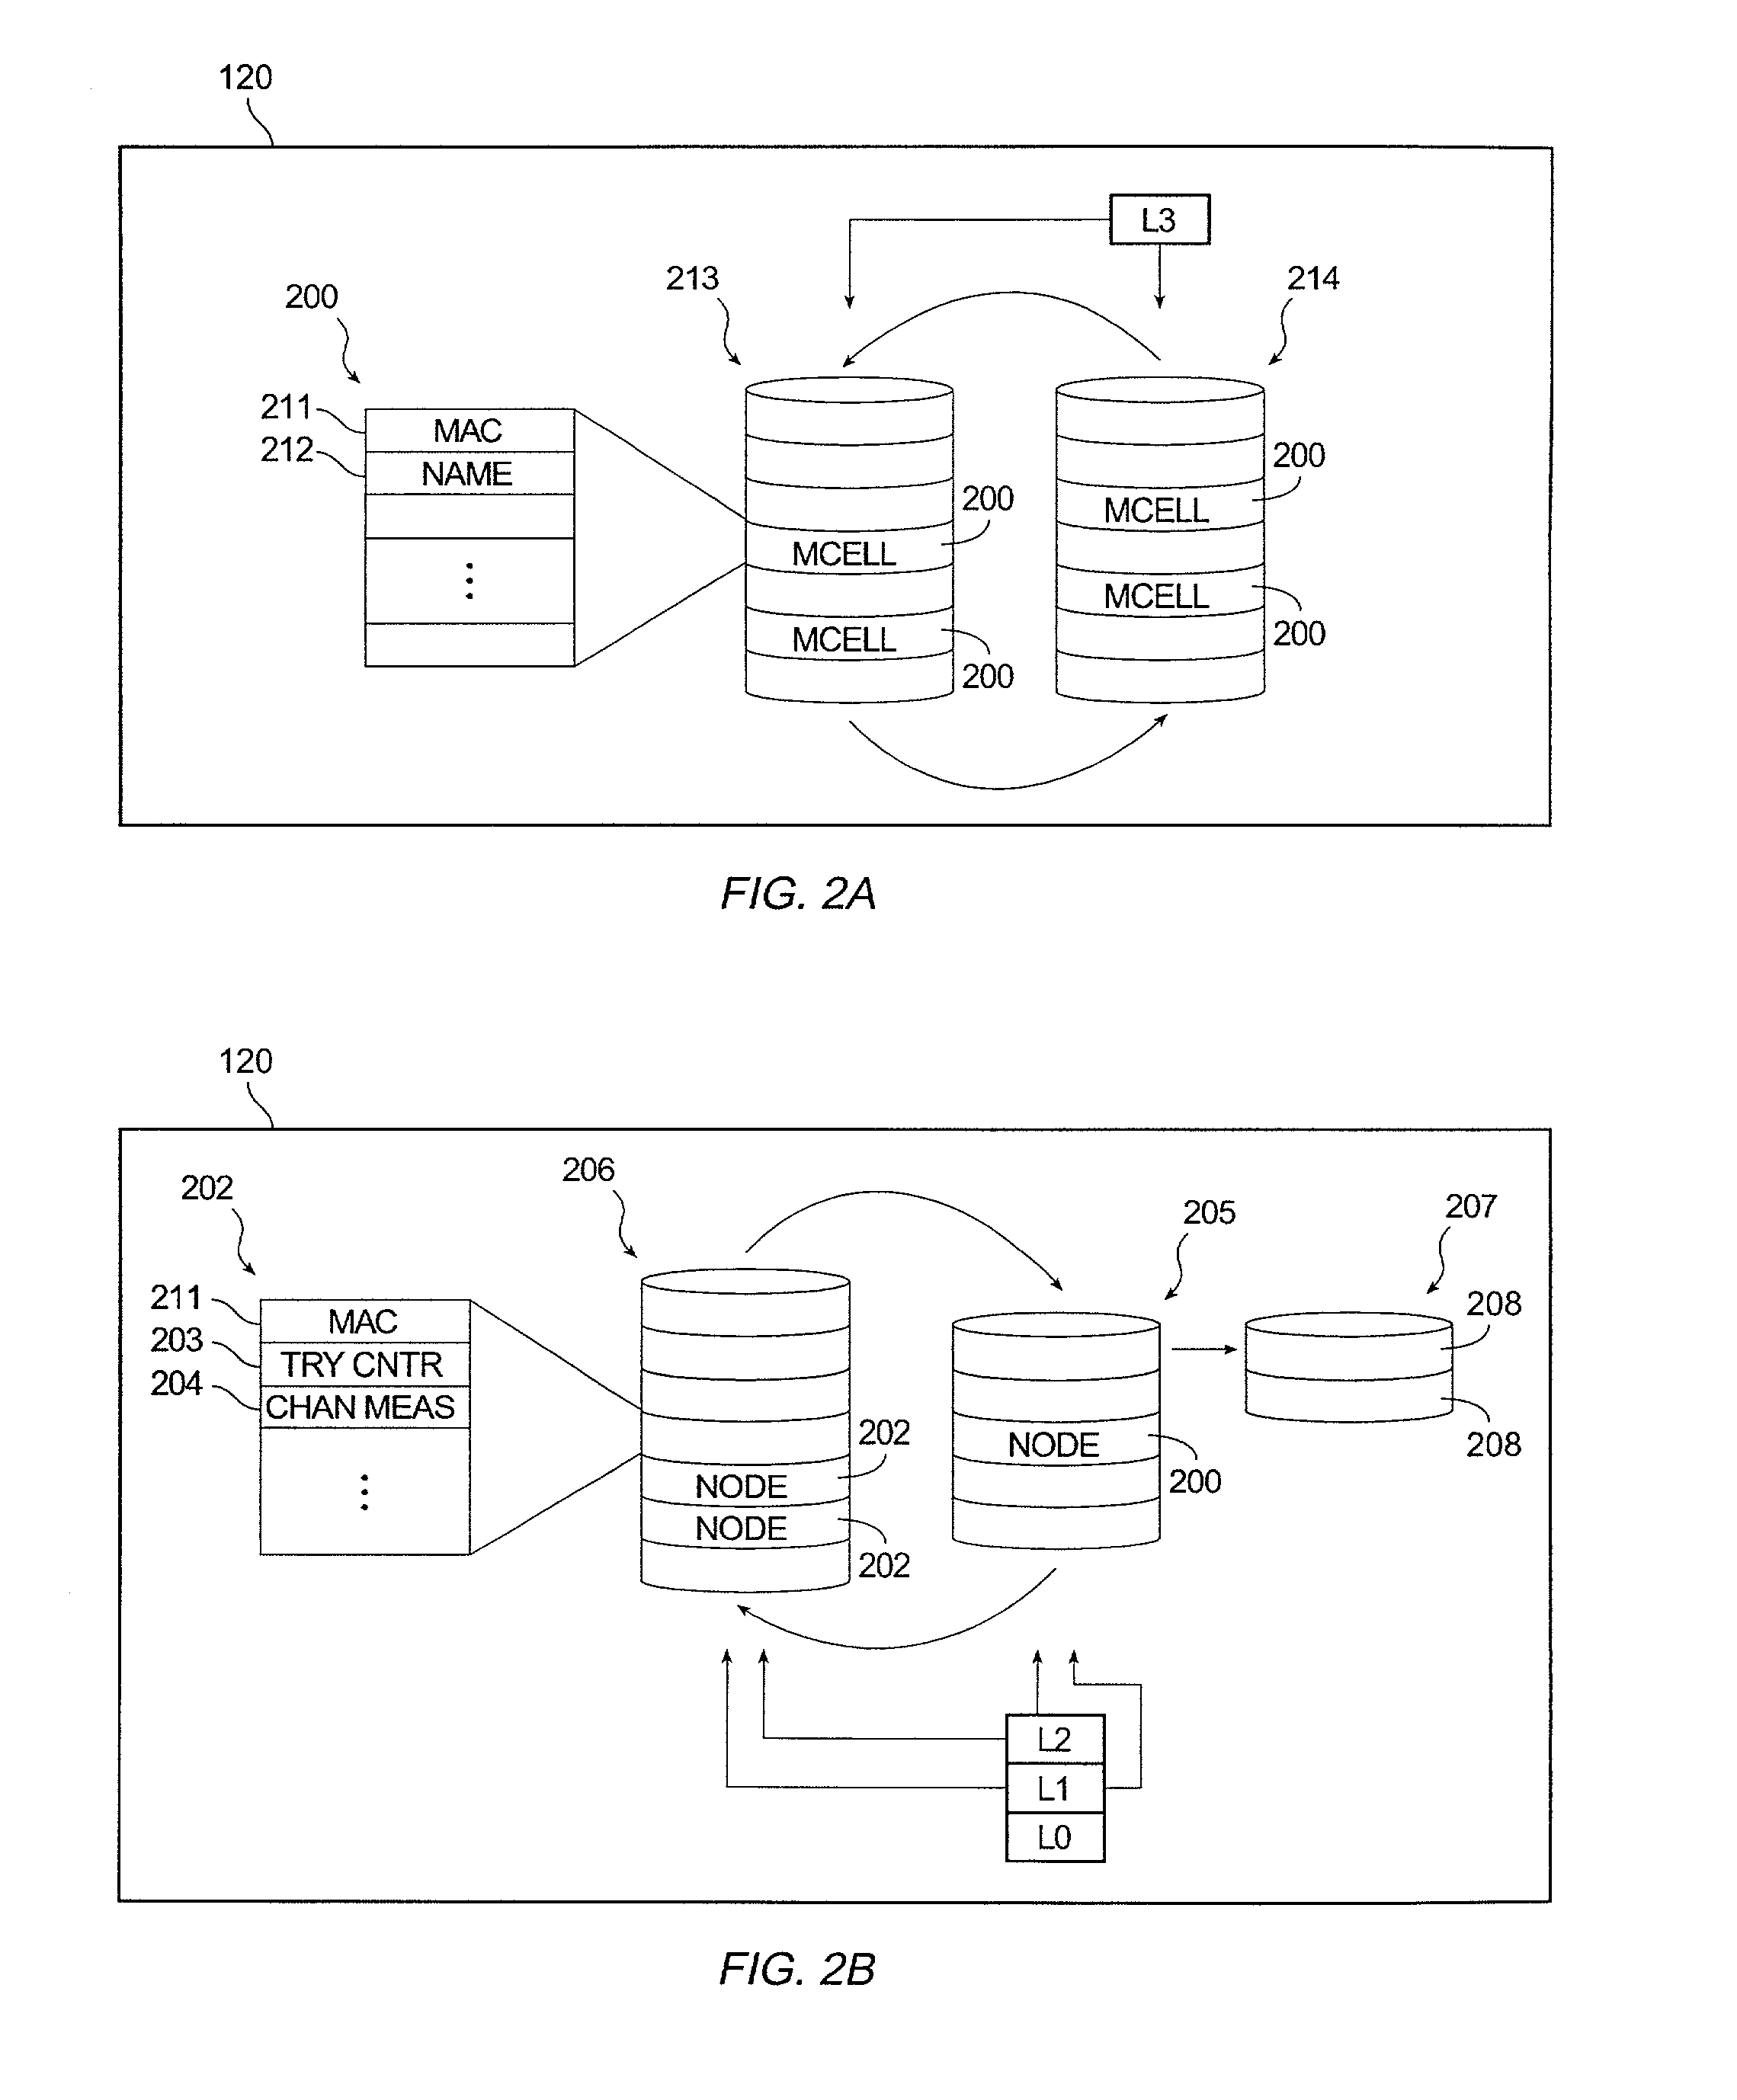 Method for enhancing mobility in a wireless mesh network